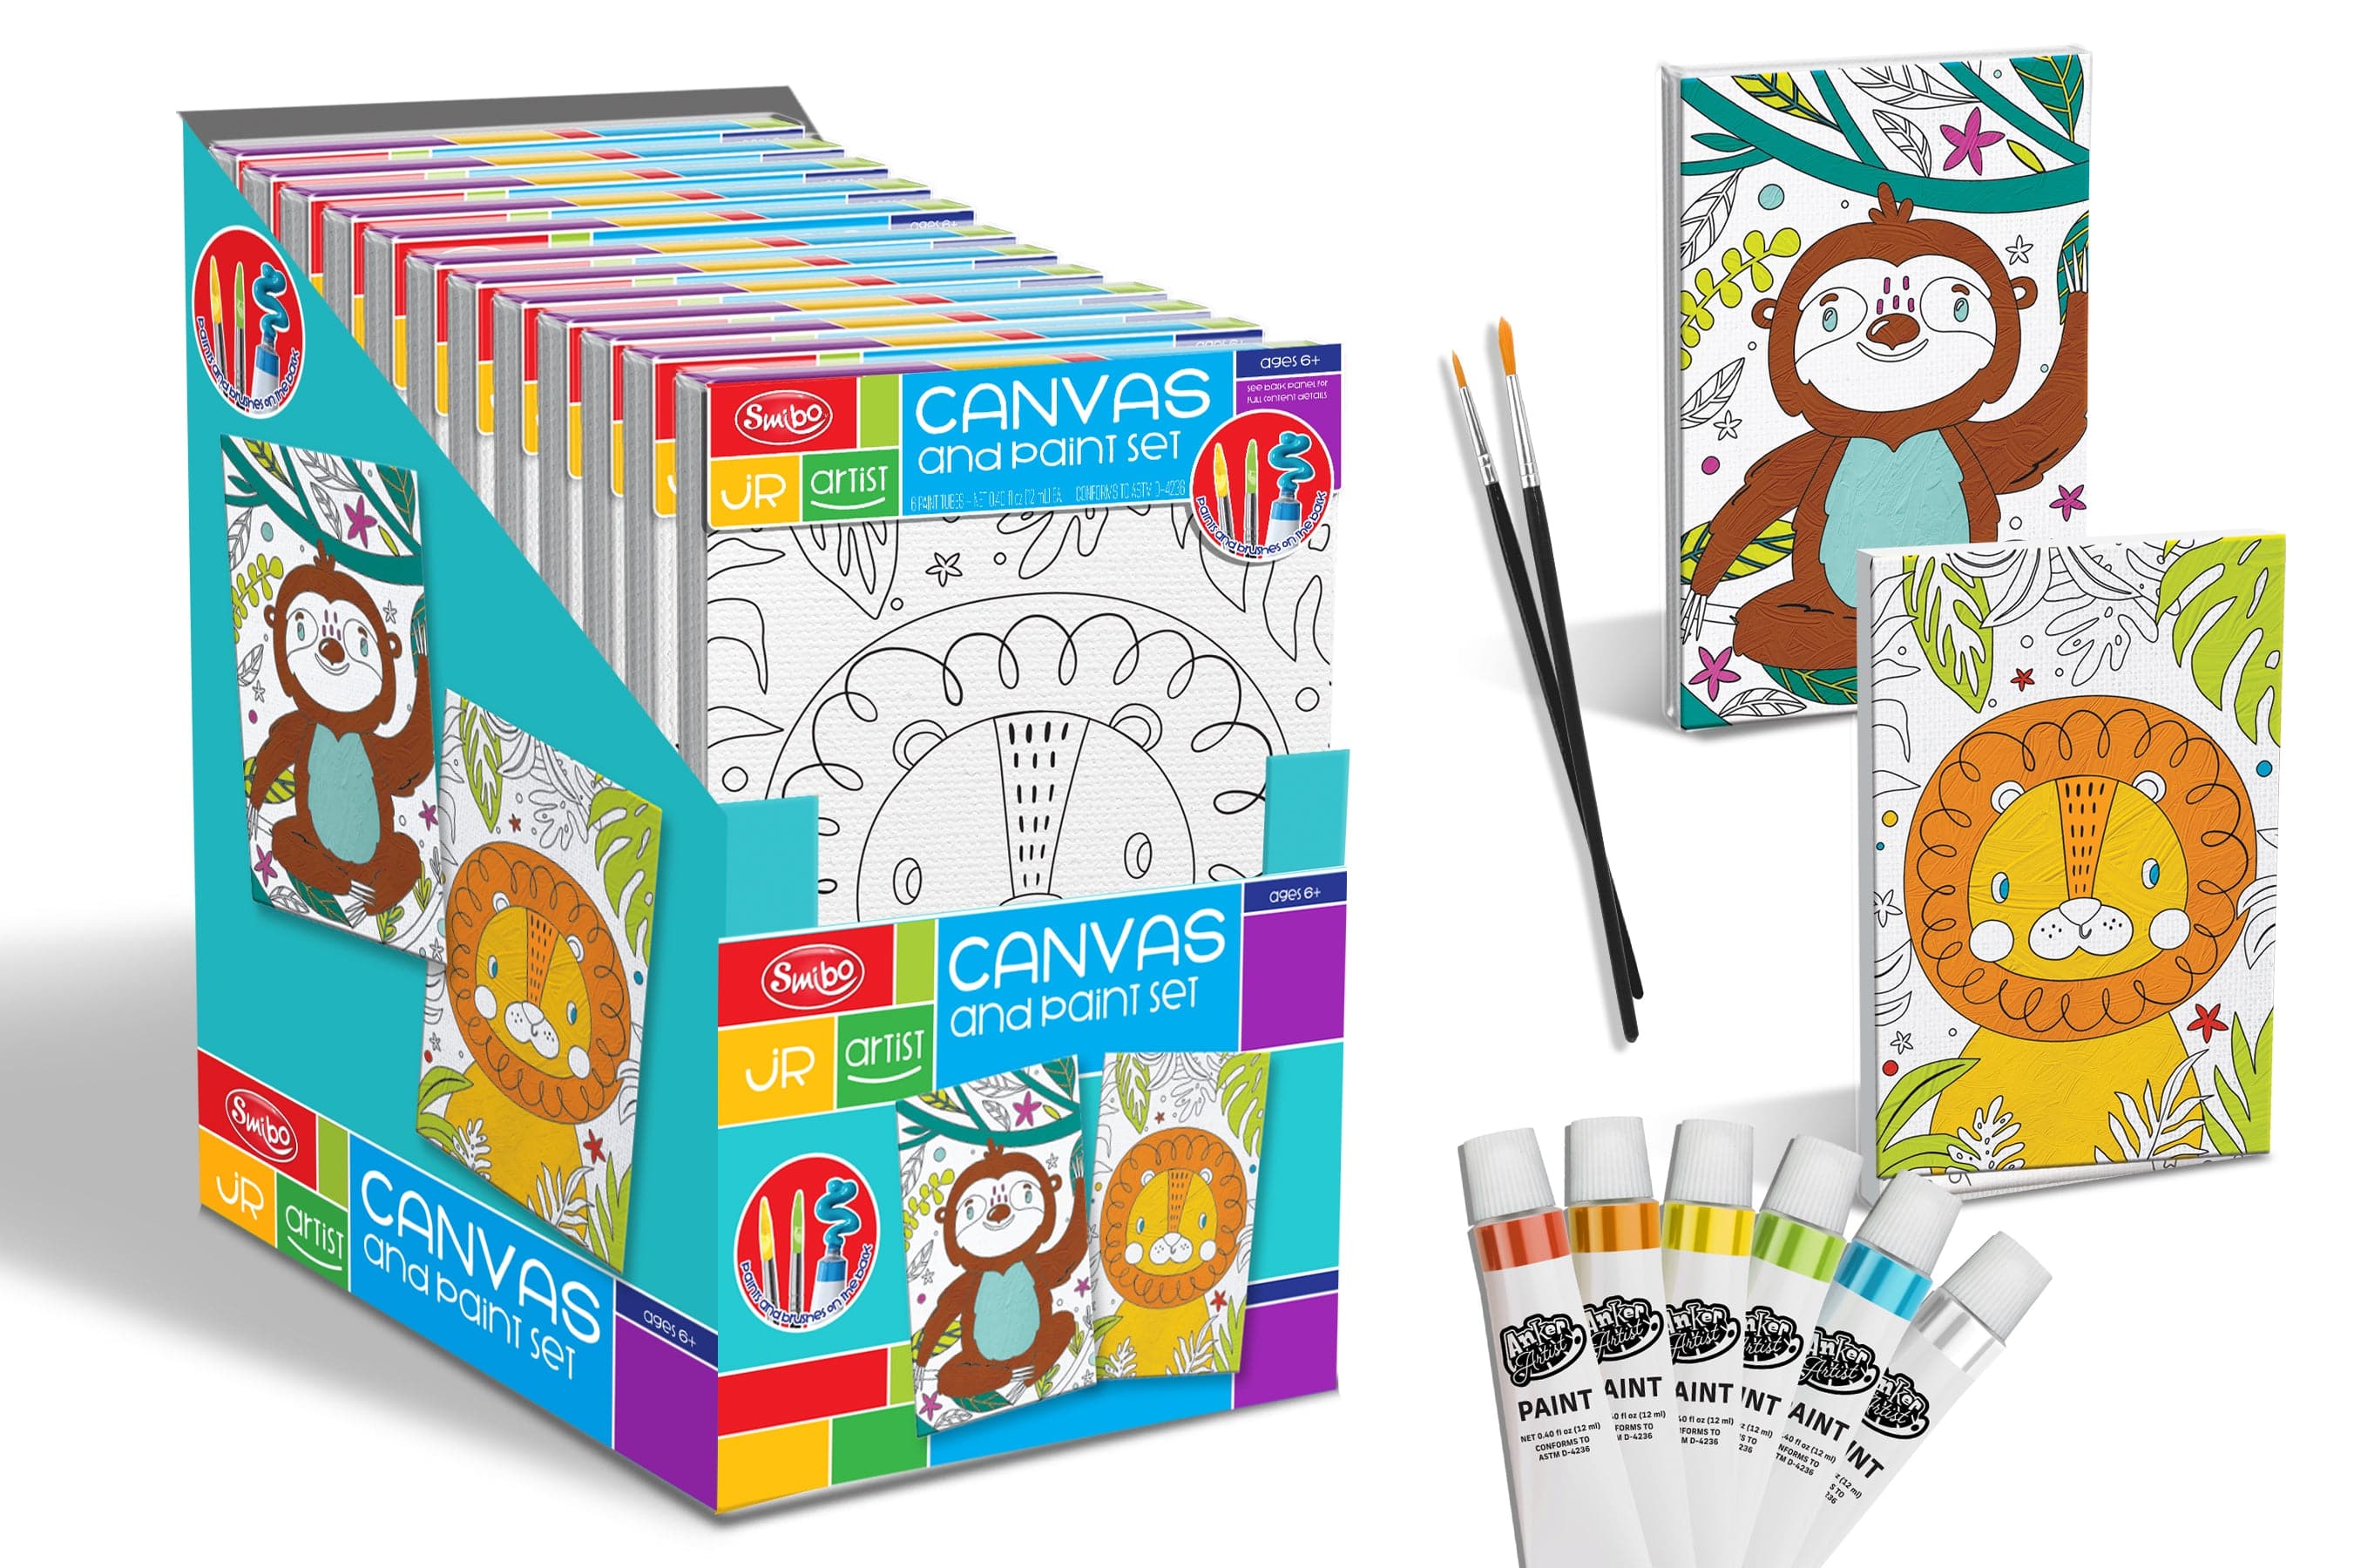 Pelican Canvas - Acrylic Painting Set with Brushes Kids Craft